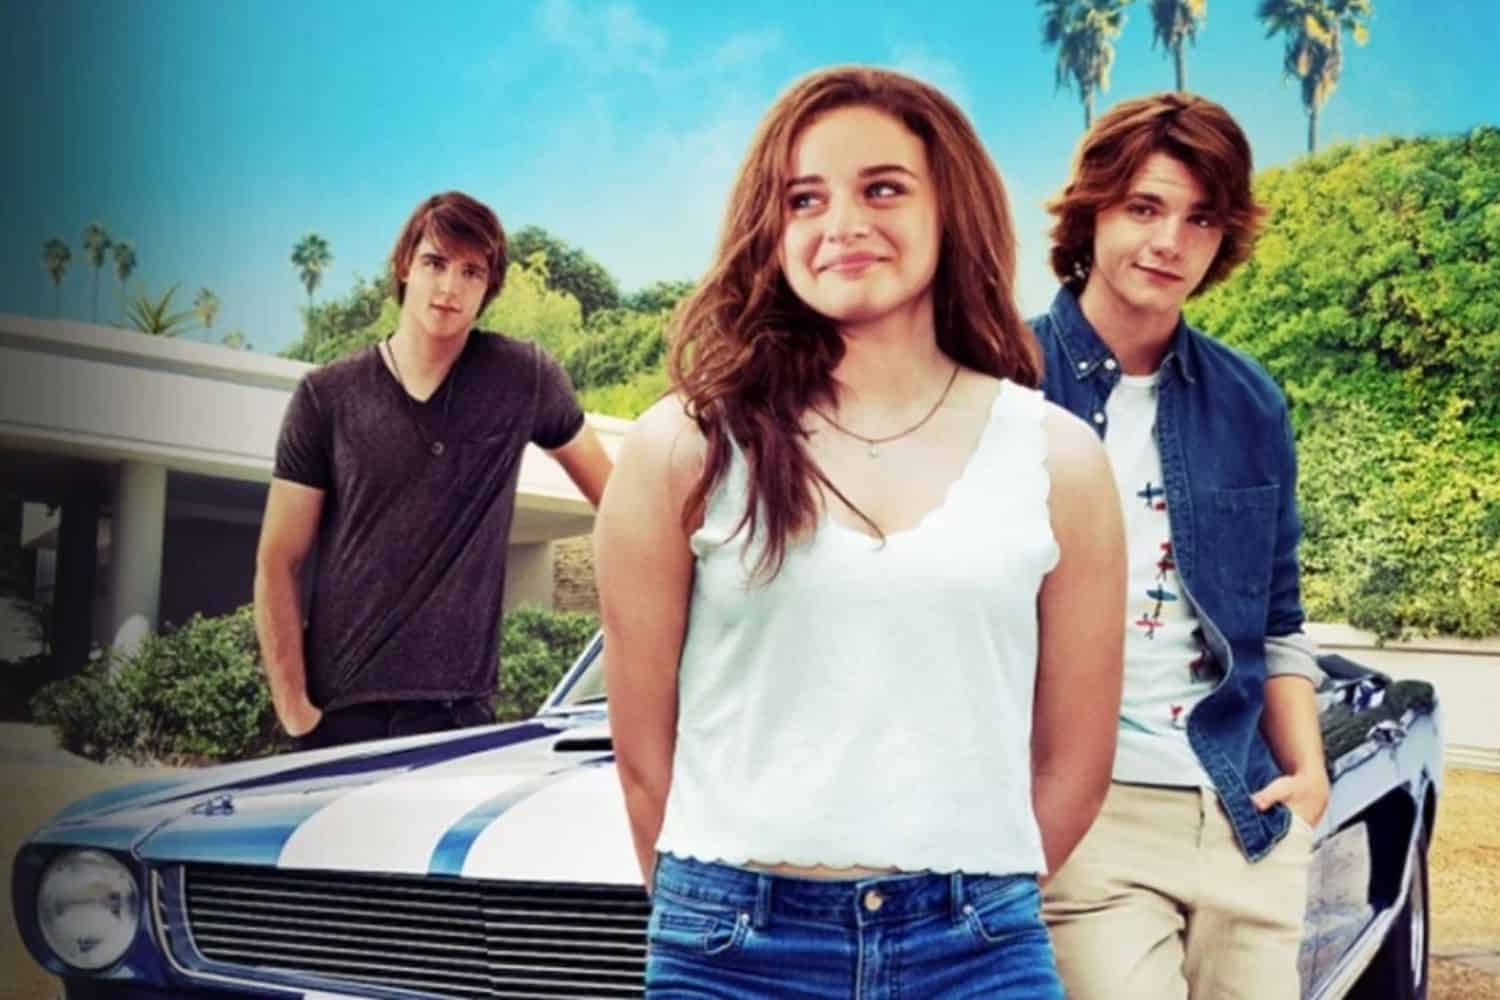 Netflix Rumours - Will there be a "The Kissing Booth 4"?